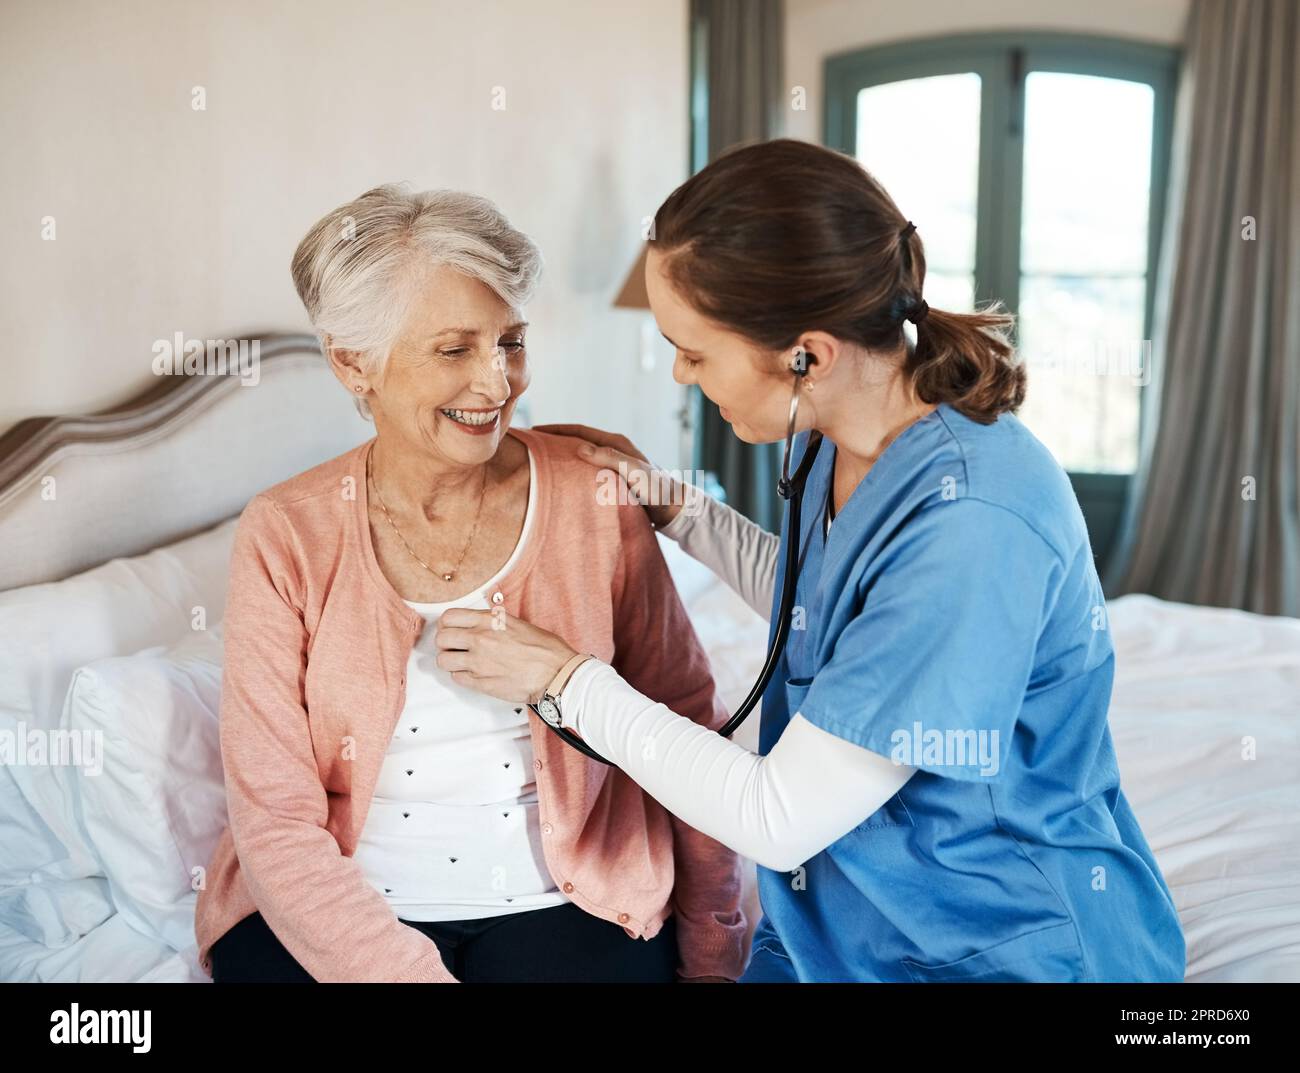 Her favourite doctor does house calls. a senior woman getting a checkup from a young nurse in a retirement home. Stock Photo